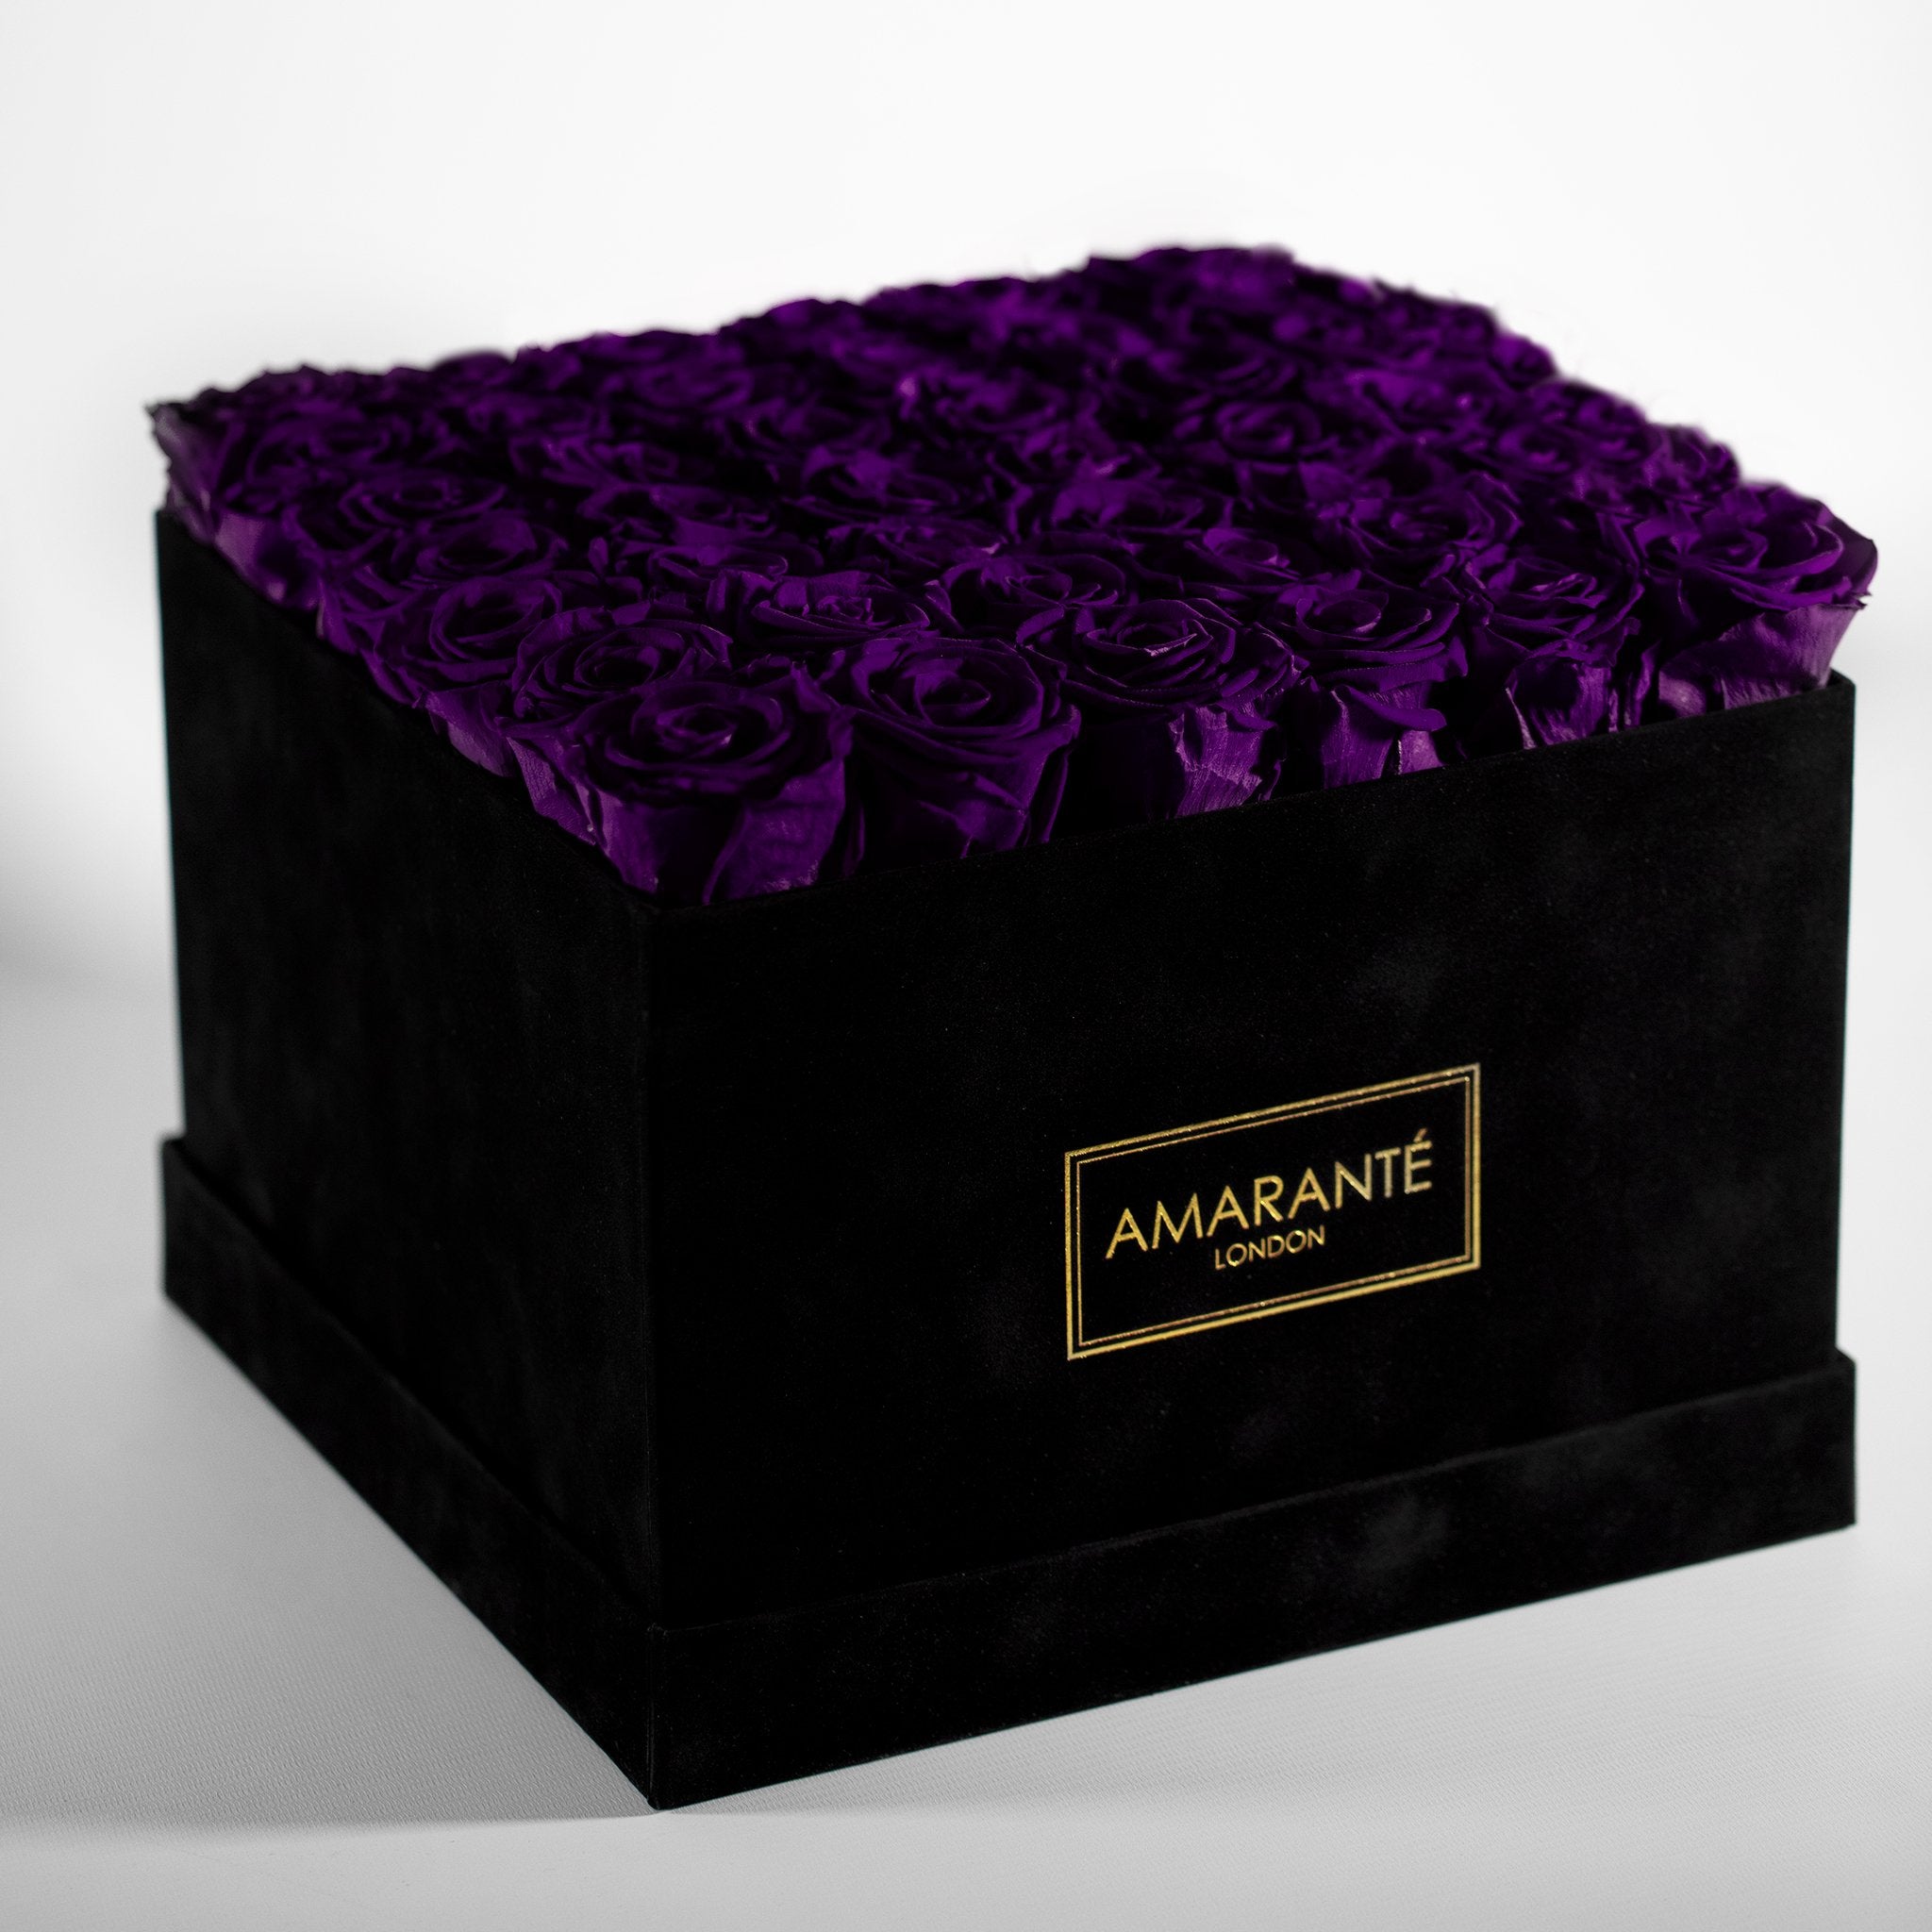 Royal purple Roses featured in a dreamy black extra large box.